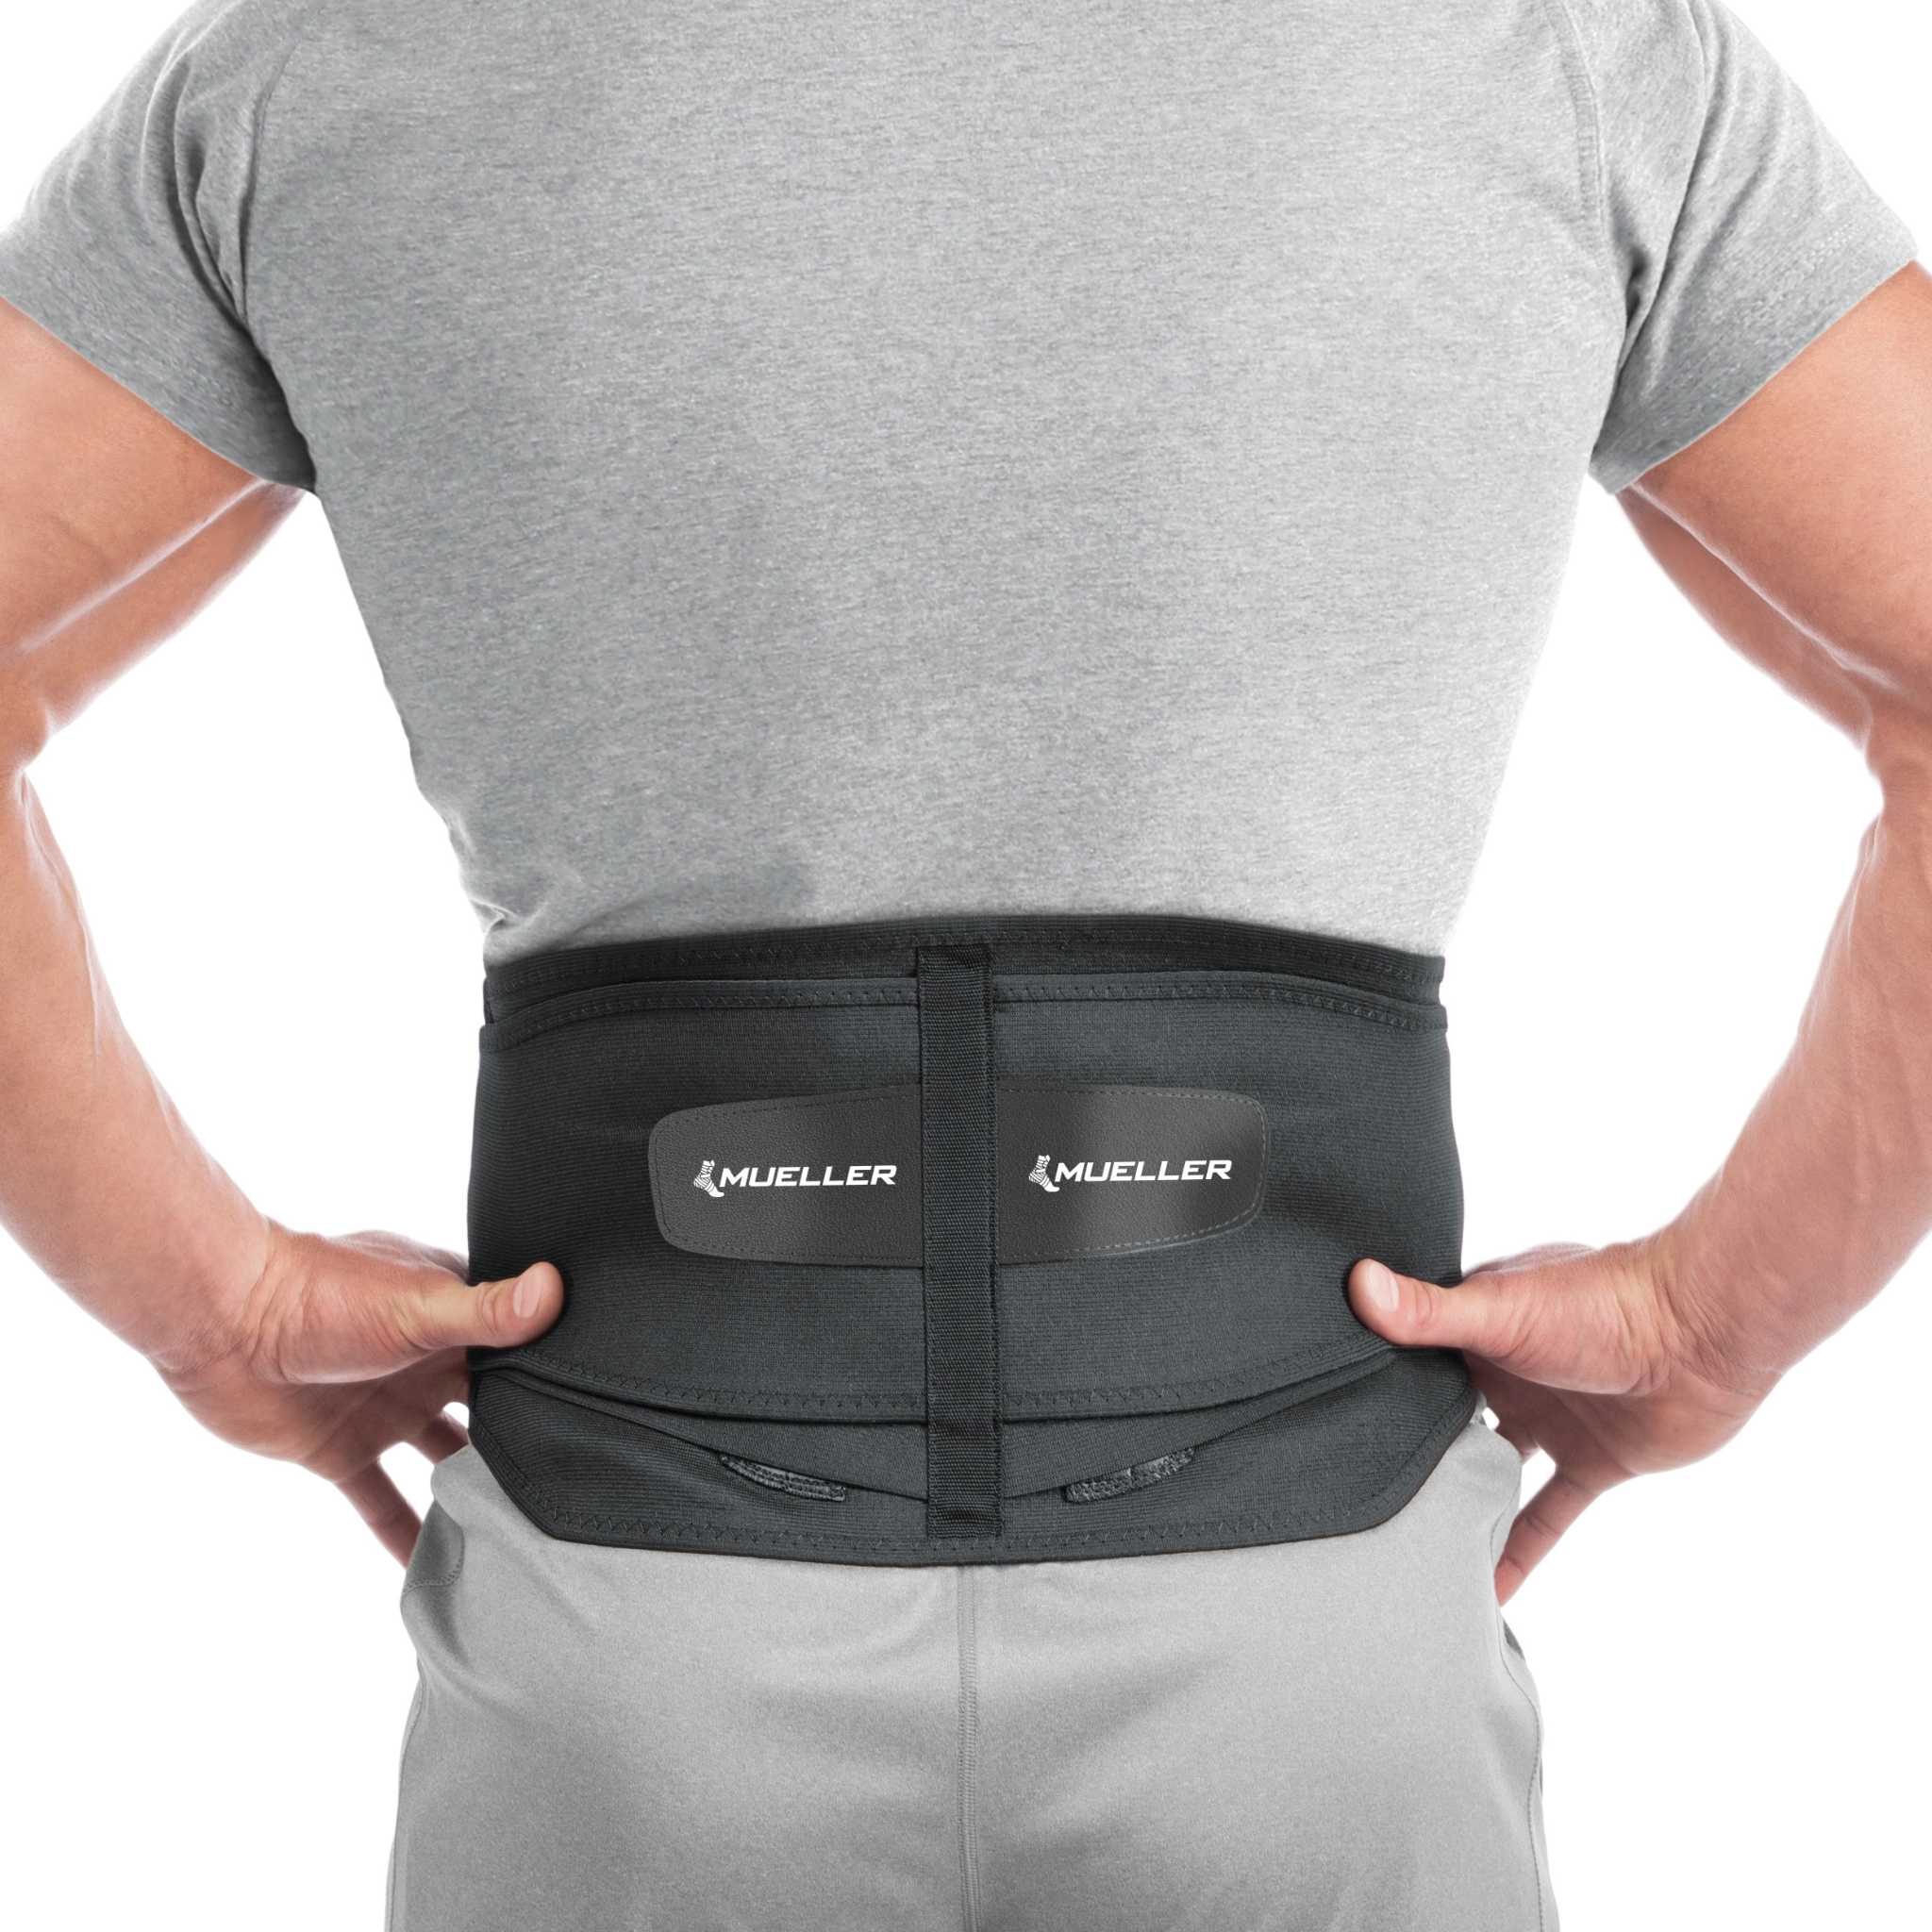 Mueller® Adjustable Lumbar Back Brace with Removable Pad, Unisex, One